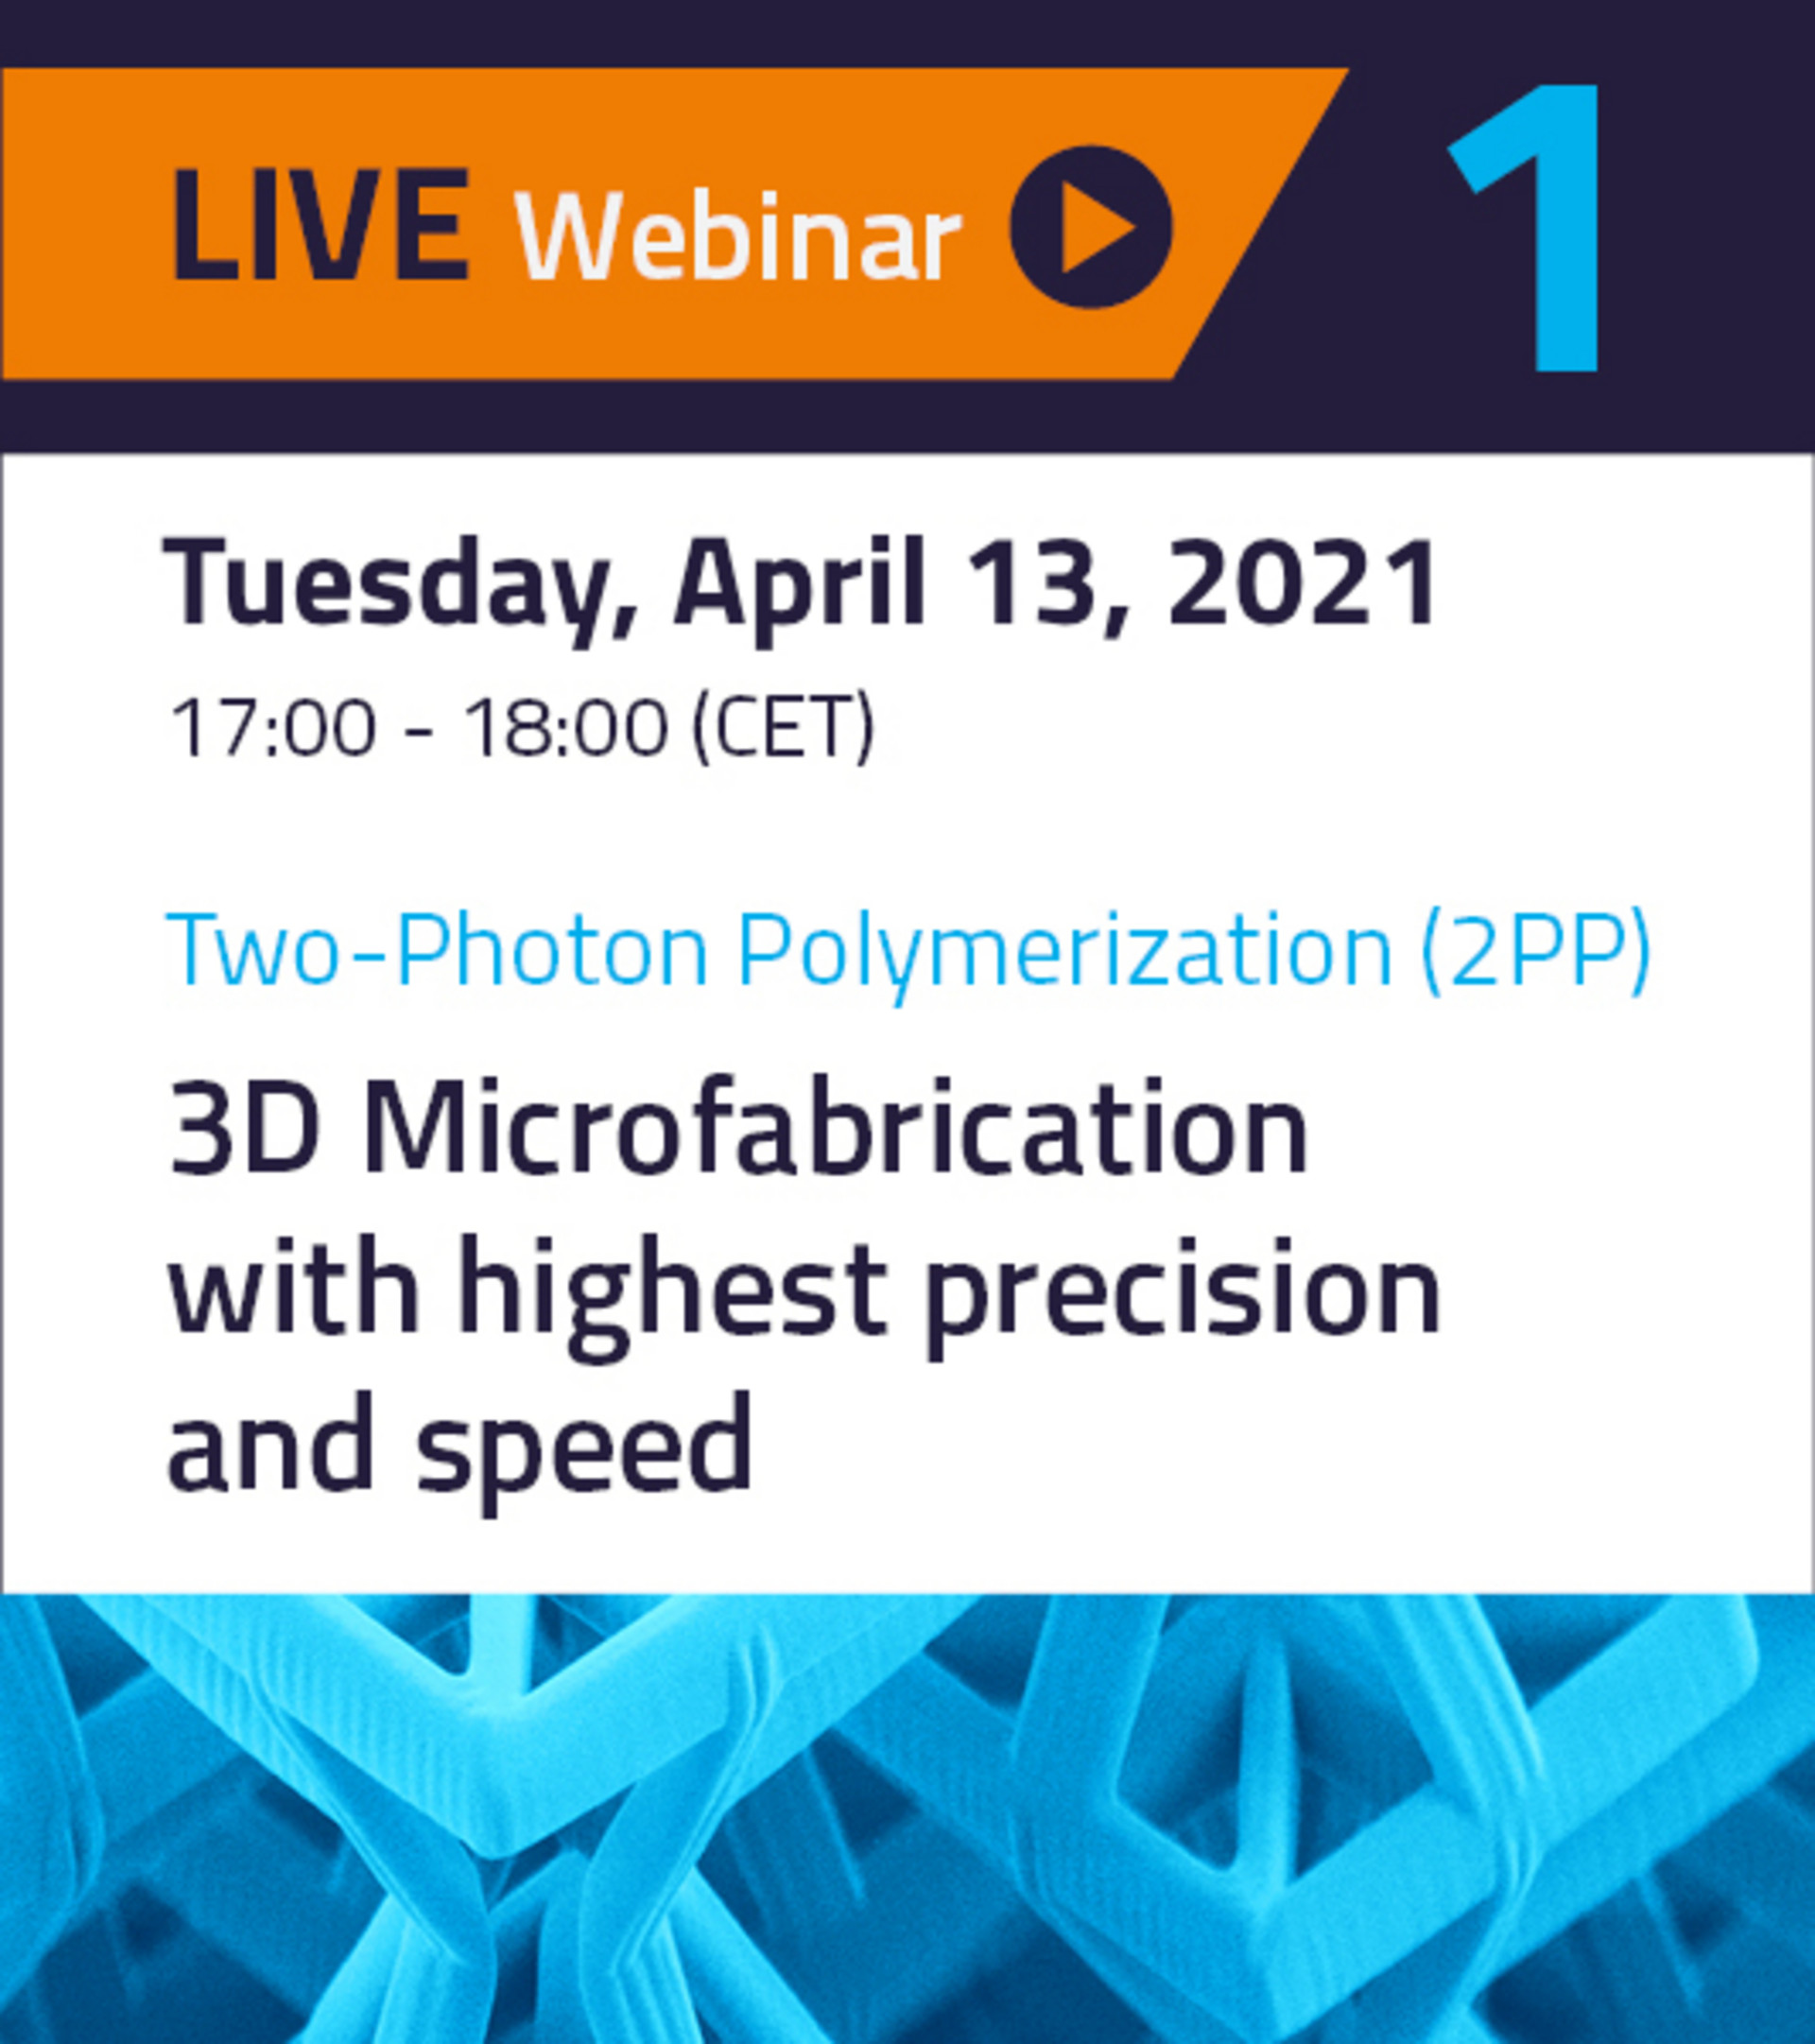 Webinar on Two-Photon-Polymerization aon April 6, 2021 with Prof. Dr. Martin Wegener and Dr. Benjamin Richter